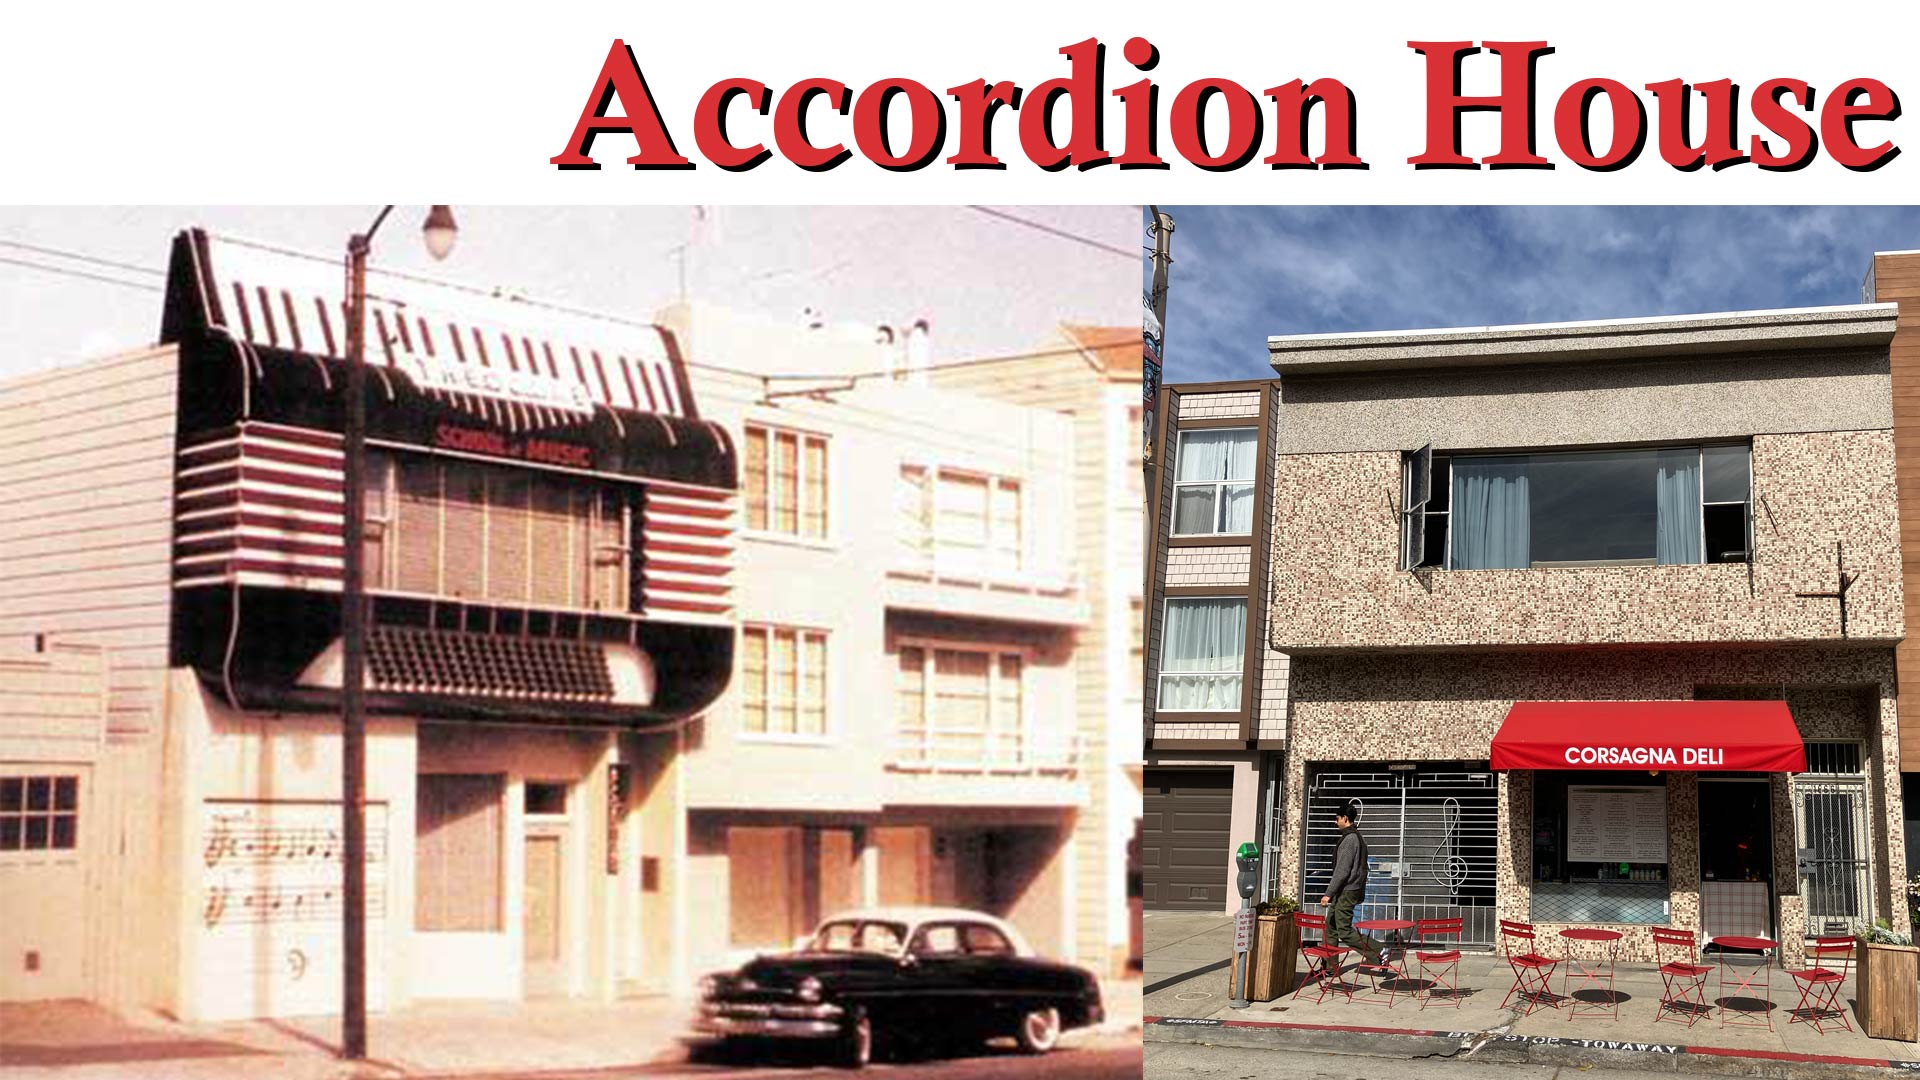 Accordion sign on building